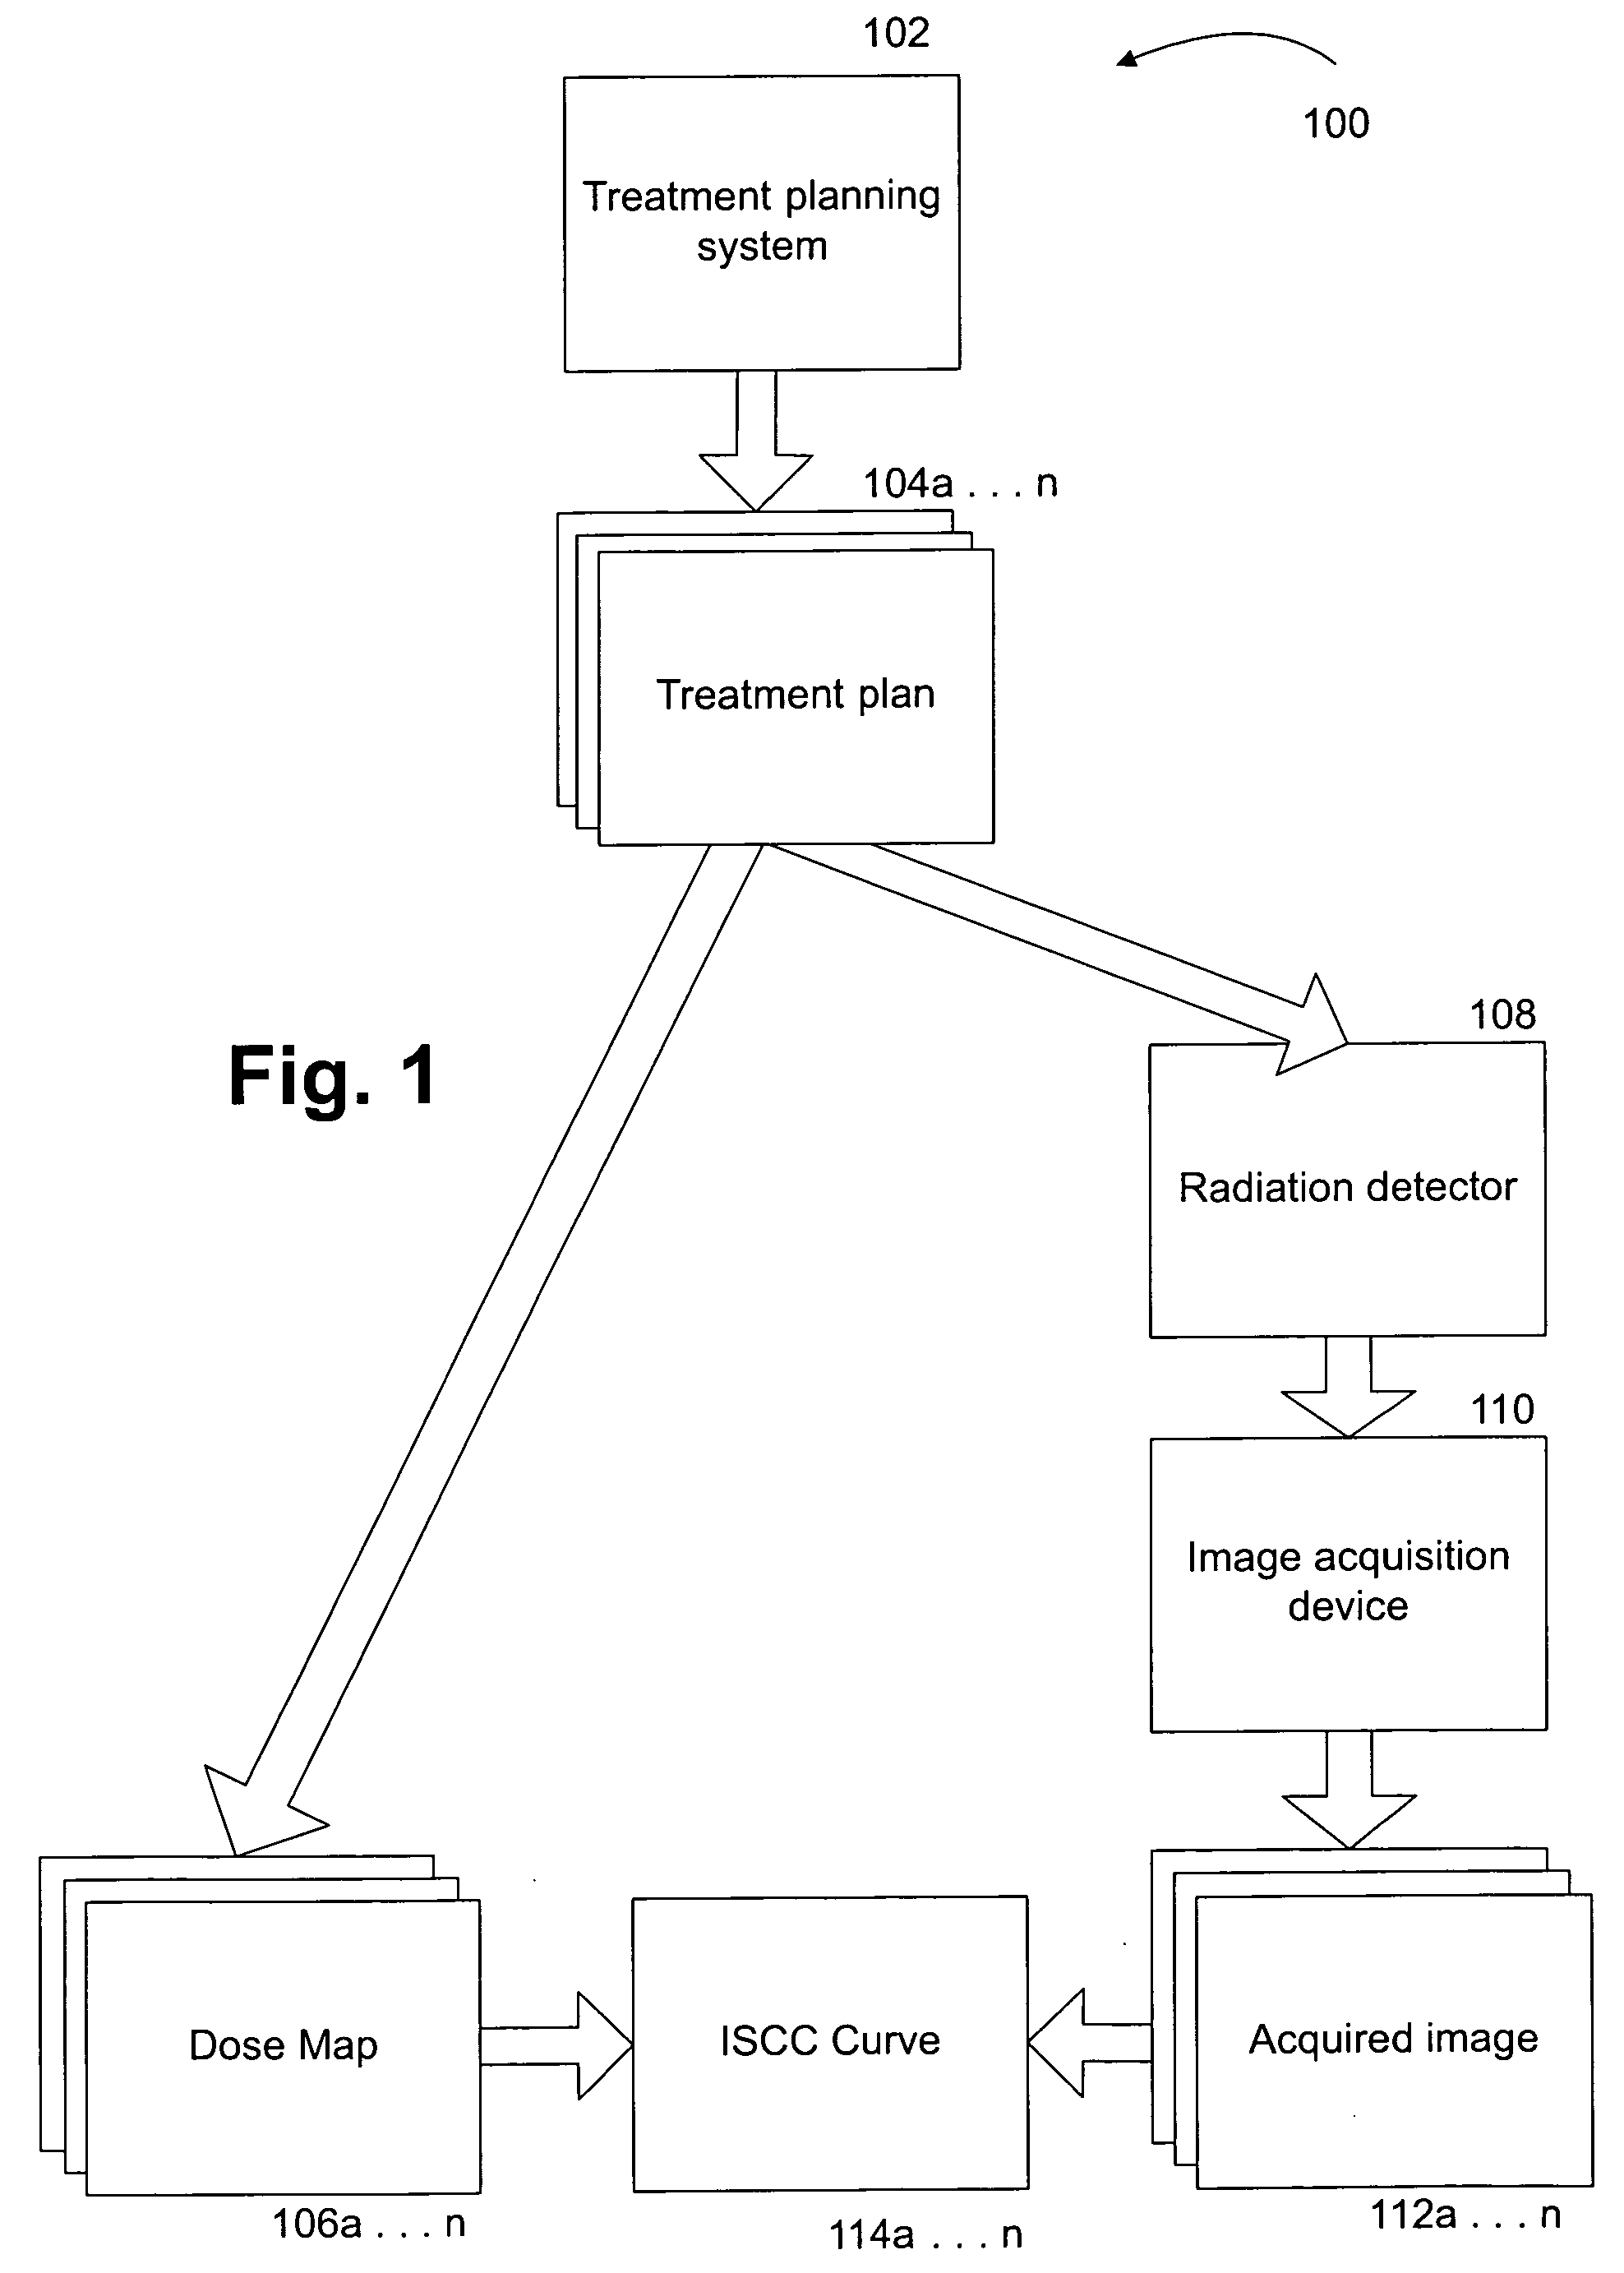 Relative and absolute calibration for dosimetric devices